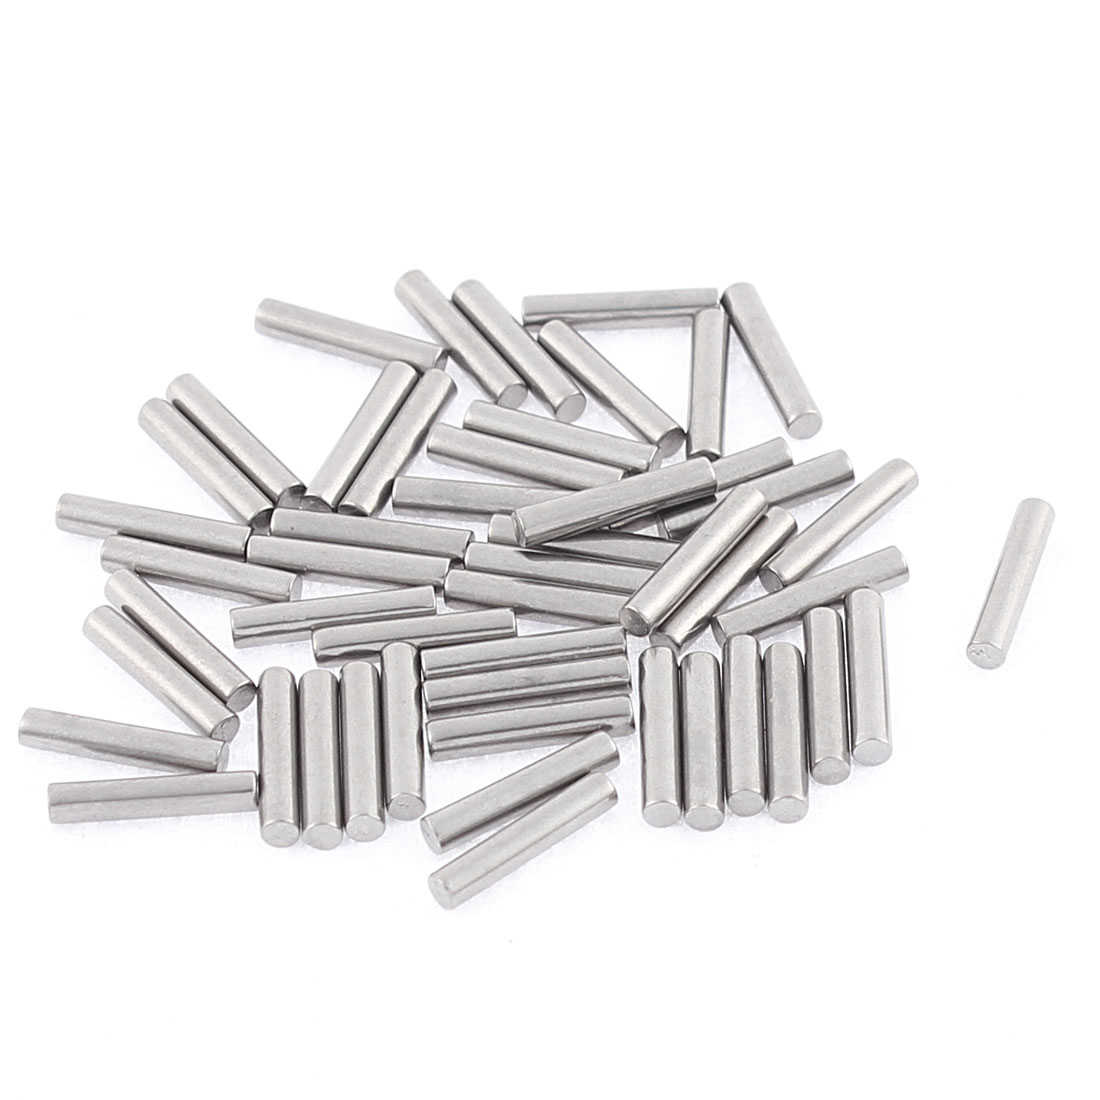 M2x10mm Stainless Steel Straight Retaining Dowel Pins Rod Fasten Elements 50 Pcs